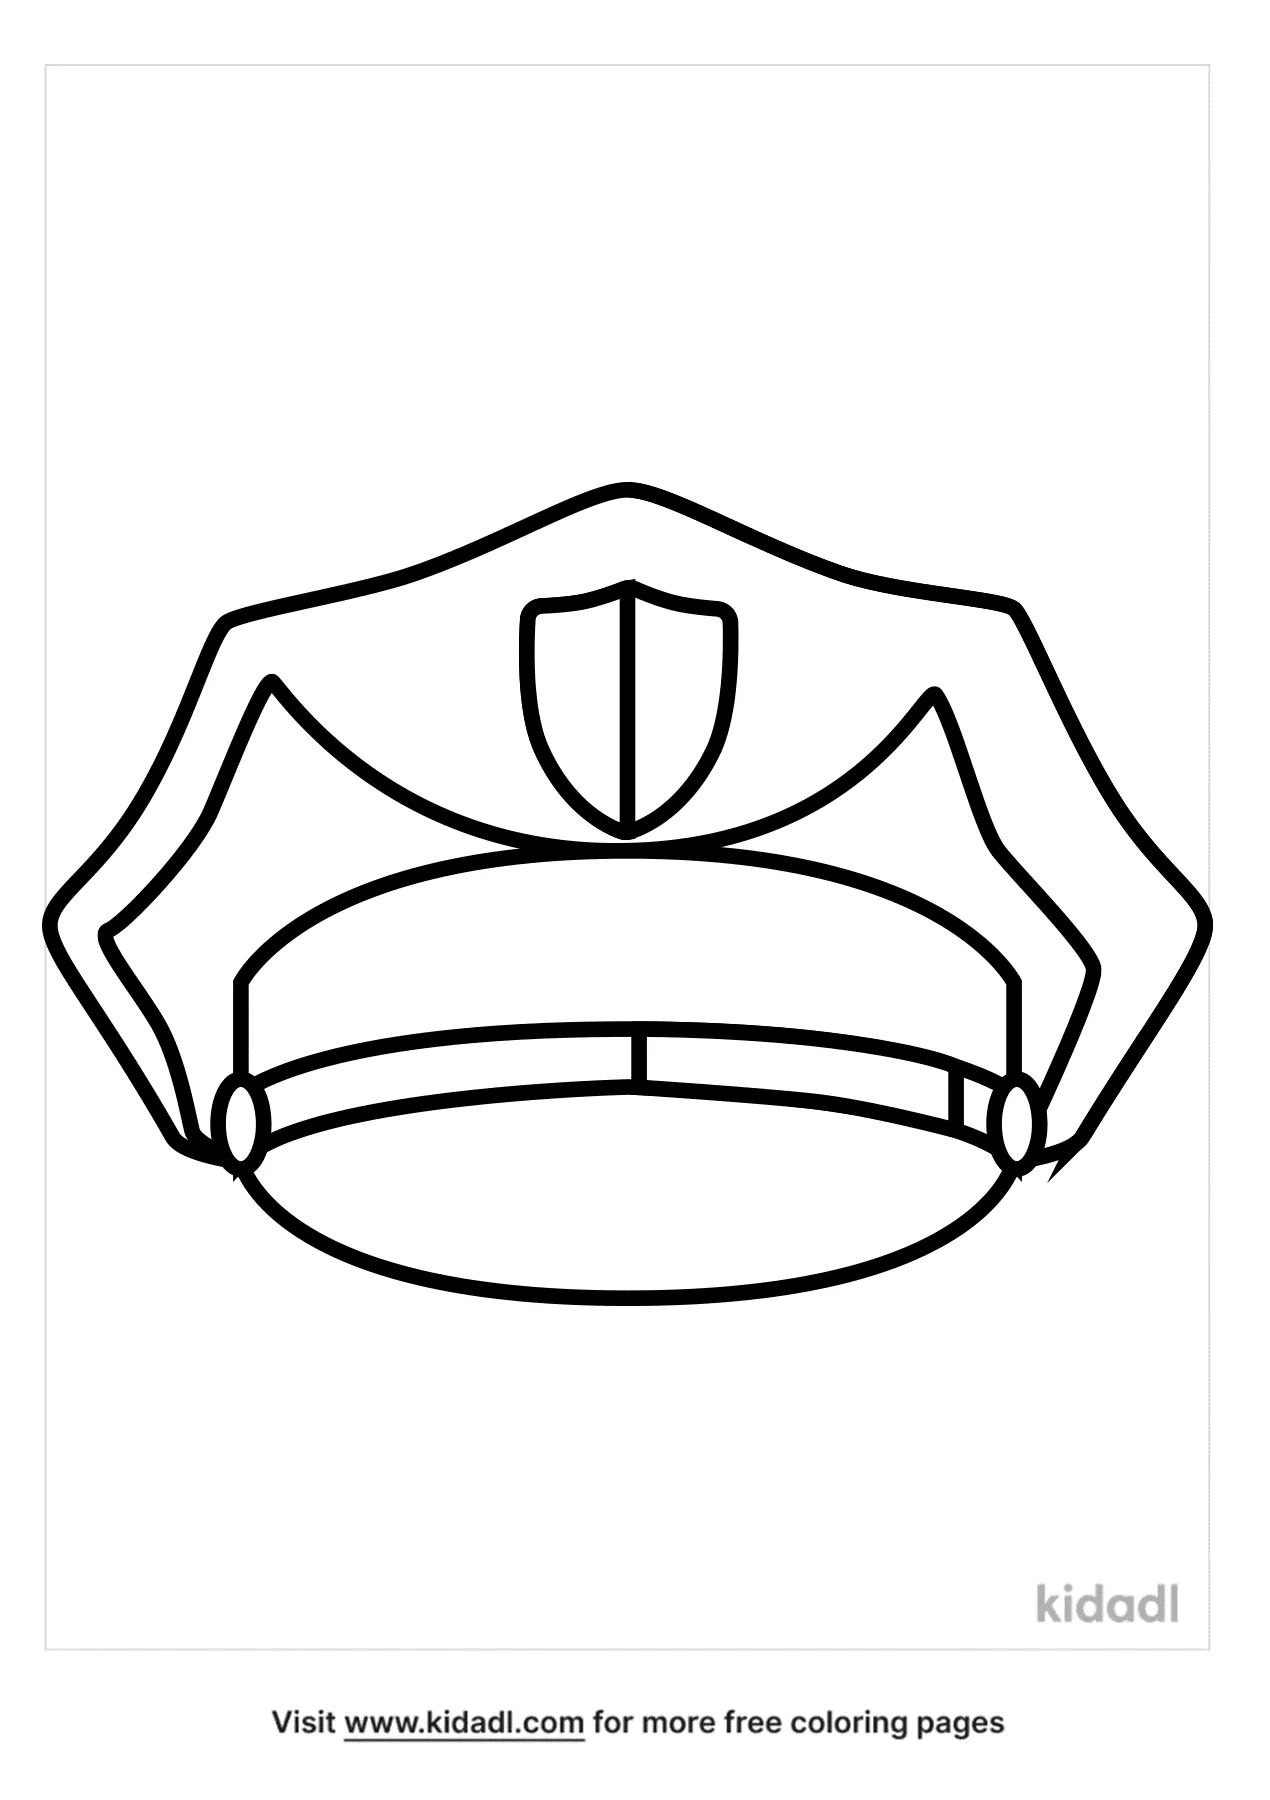 Free police hat coloring page coloring page printables